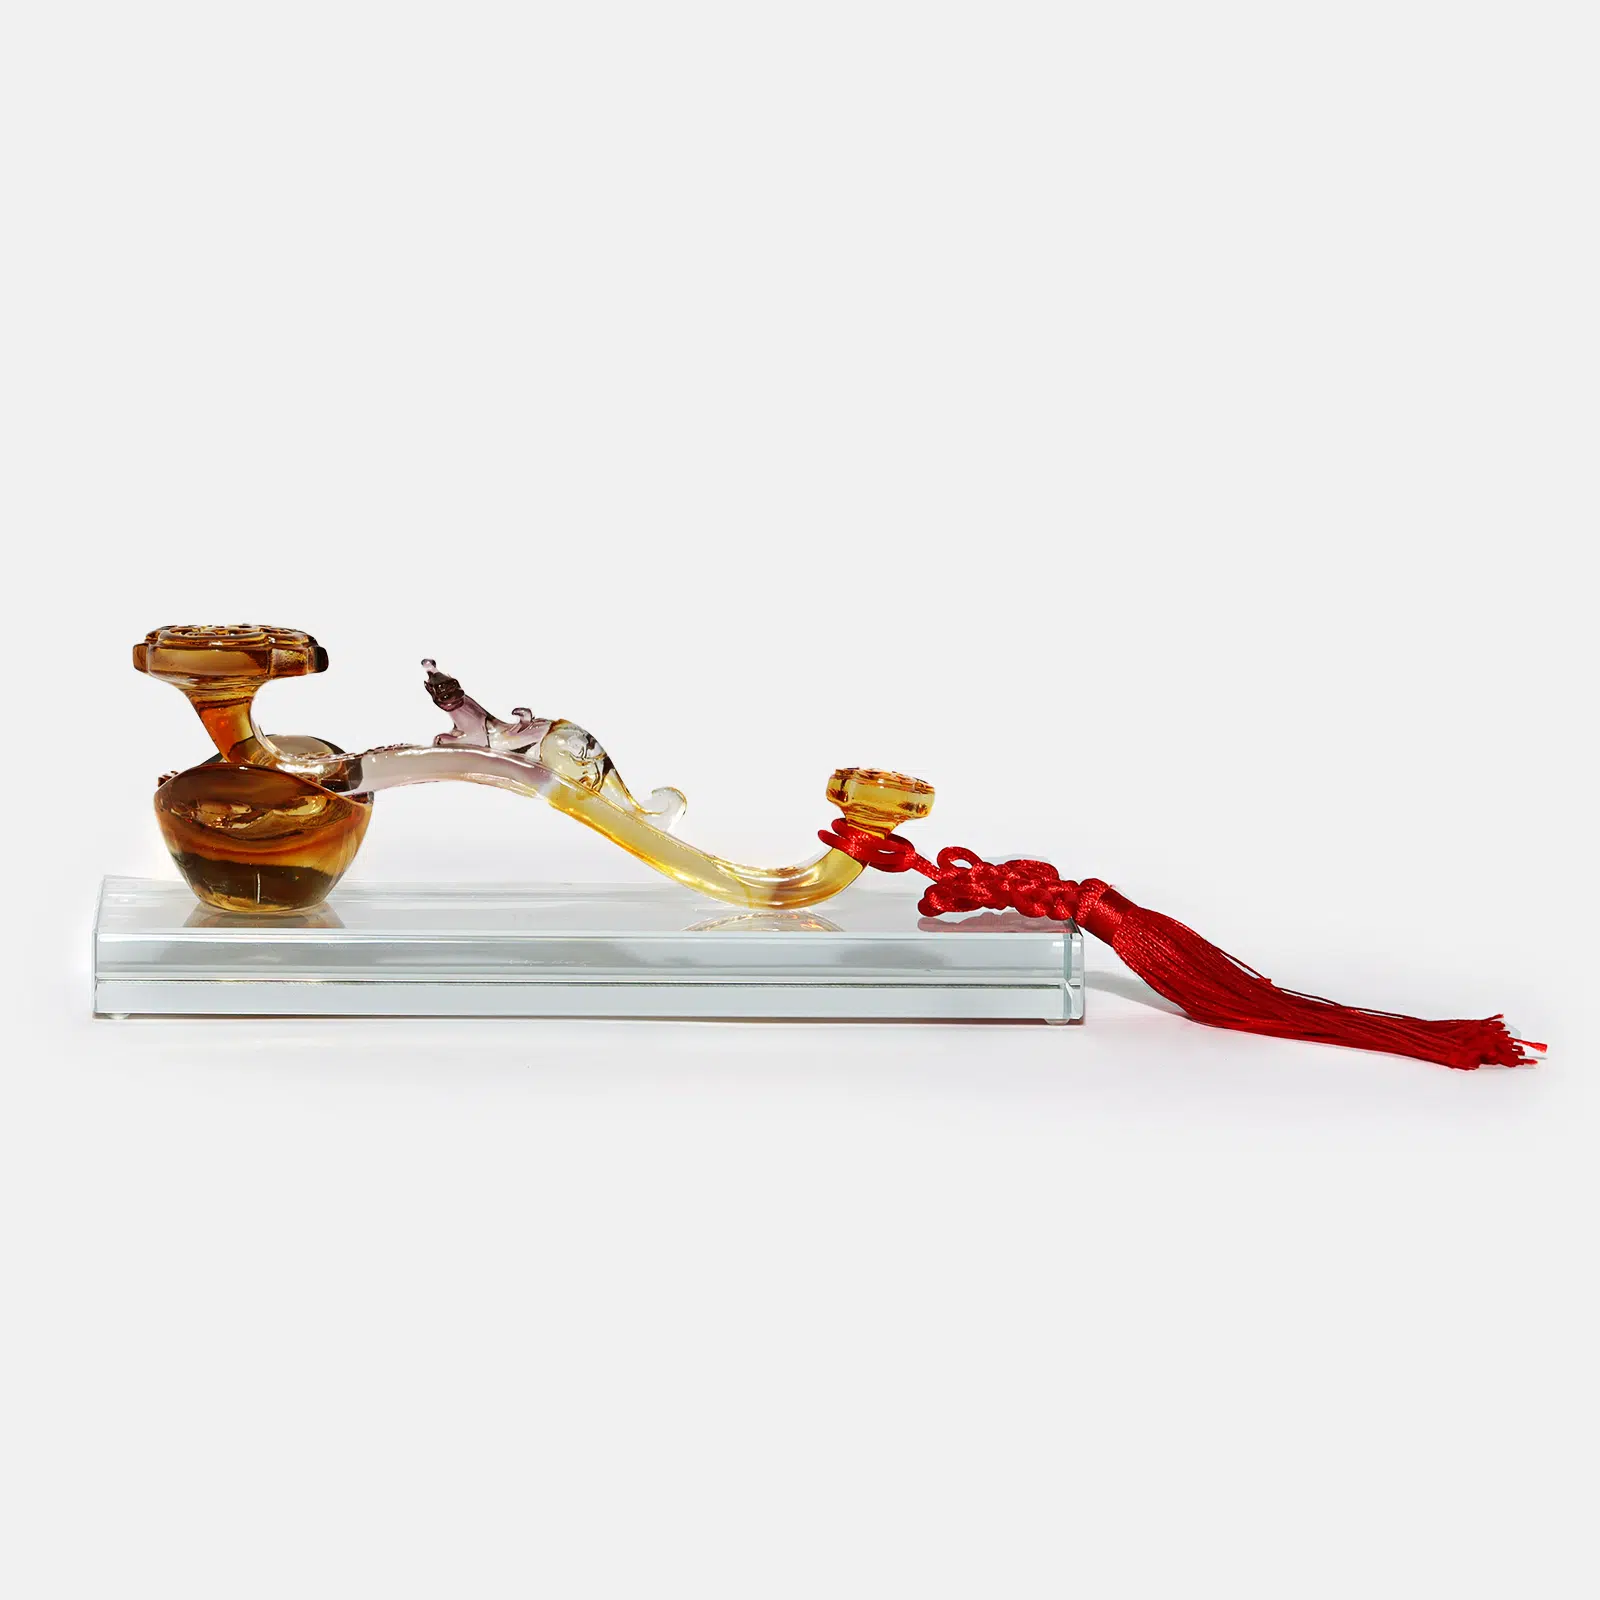 Crystal-Feng-Shui-Fulfilling-Wishes-Ruyi-Scepter-Statue-HC330023